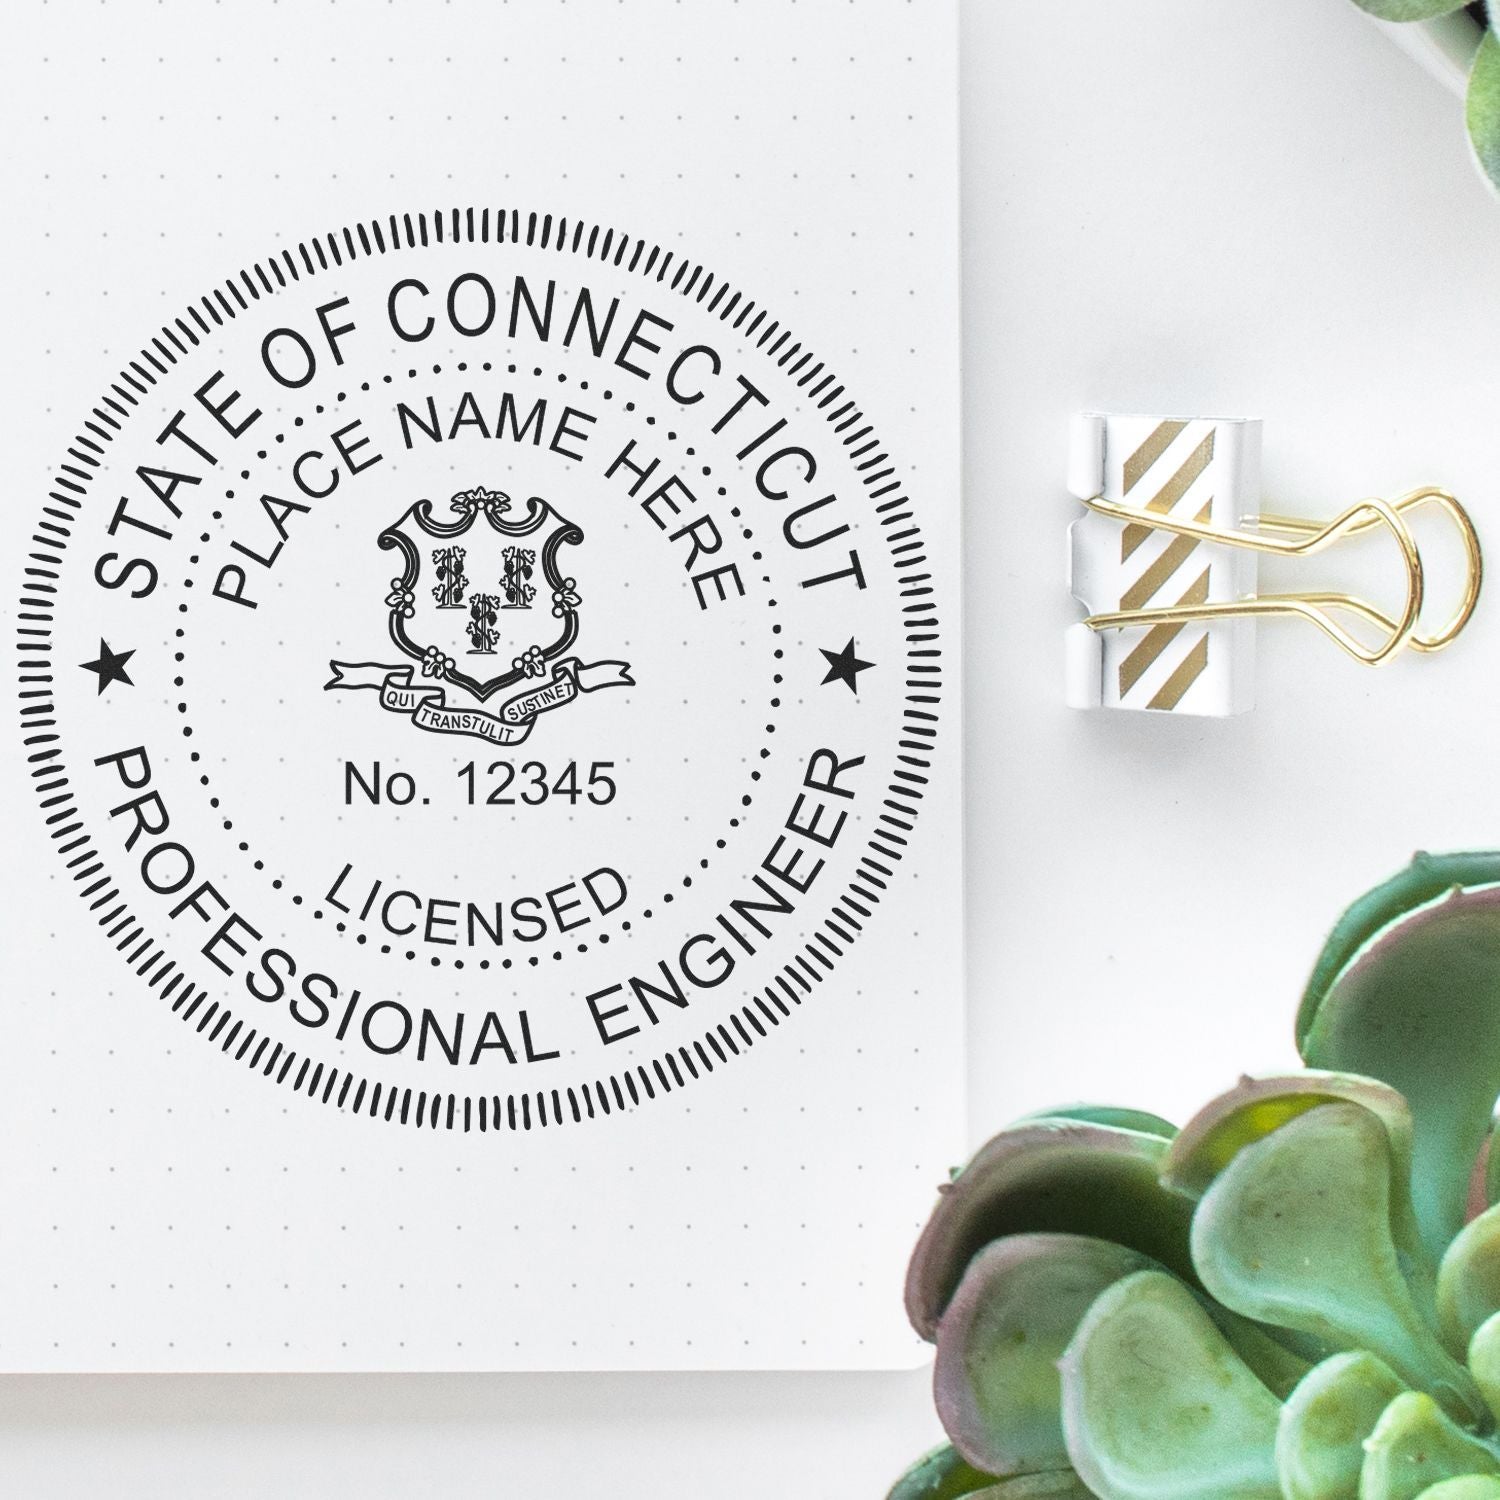 Engineering Excellence: Streamlining the Connecticut PE Stamp Application Feature Image